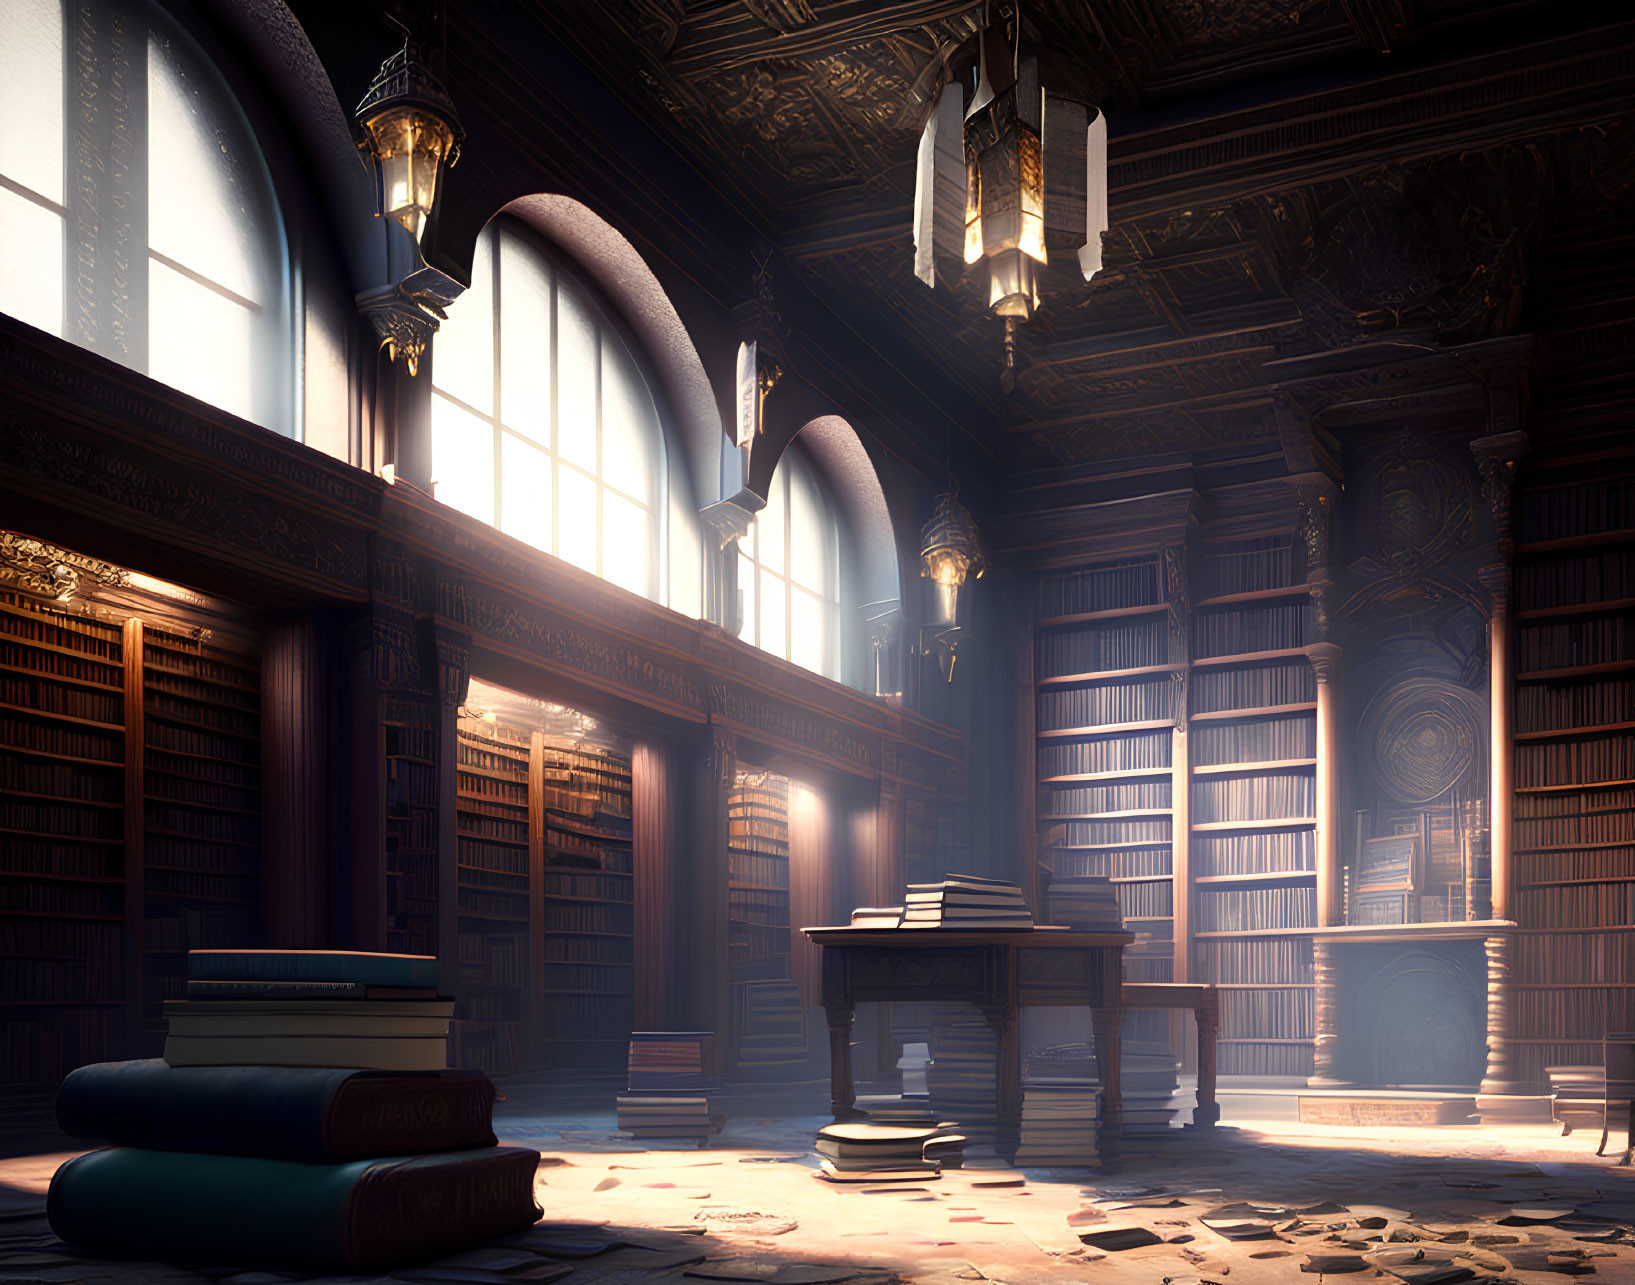 Sunlit Library with Tall Windows and Book-lined Walls